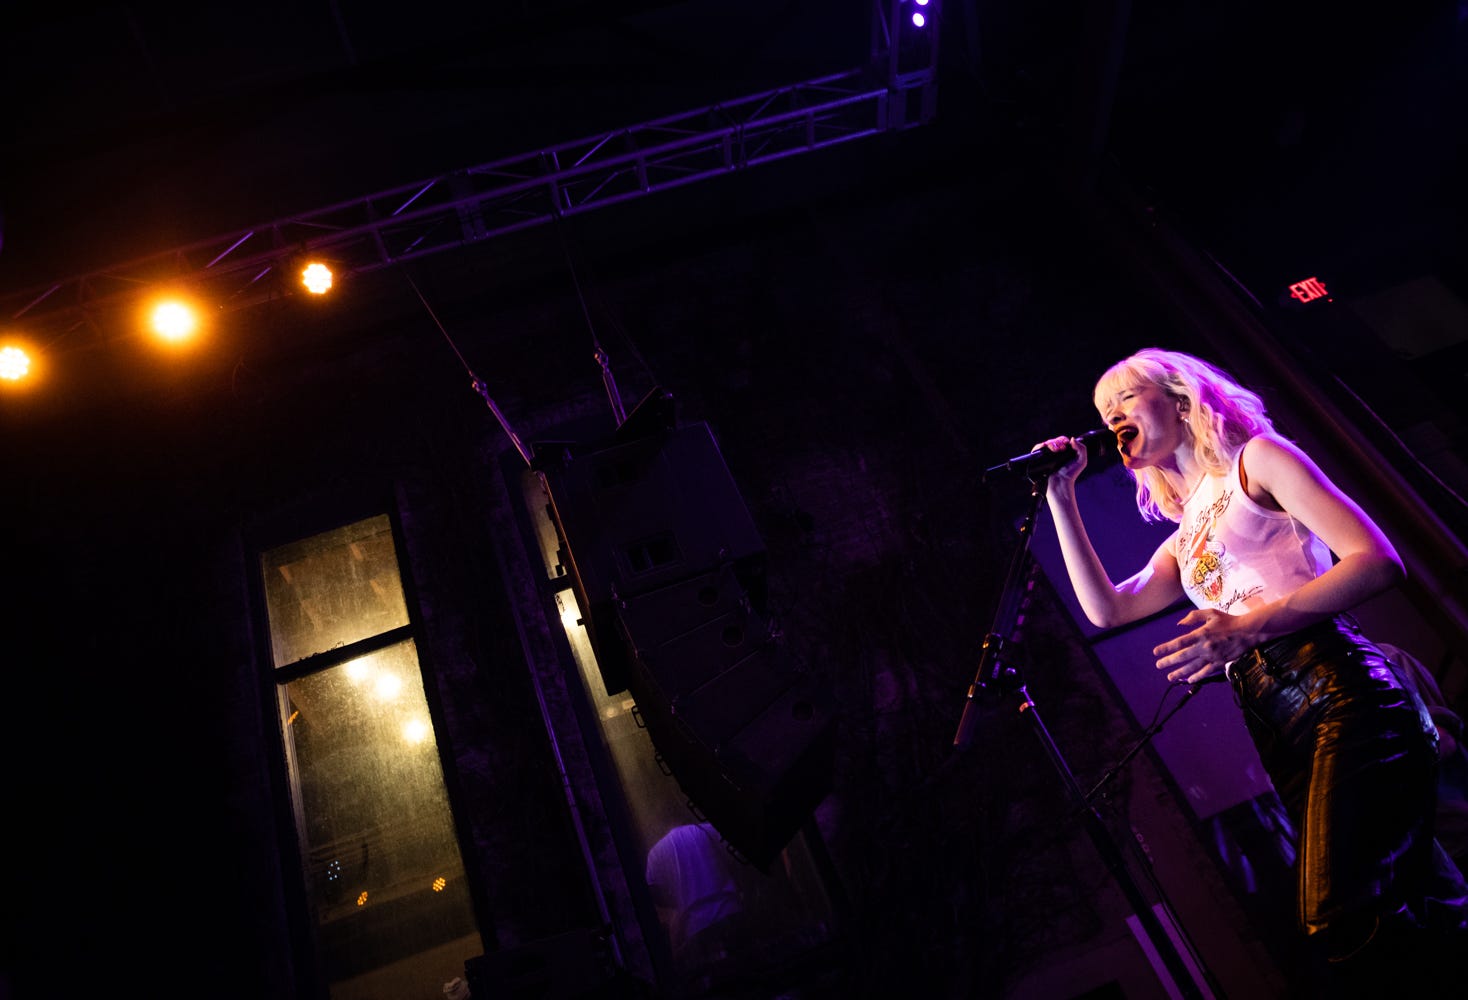 U.K. pop artist Maisie Peters performs at the SXSW British Music Embassy in the Cedar Street Courtyard, March 19, 2022.